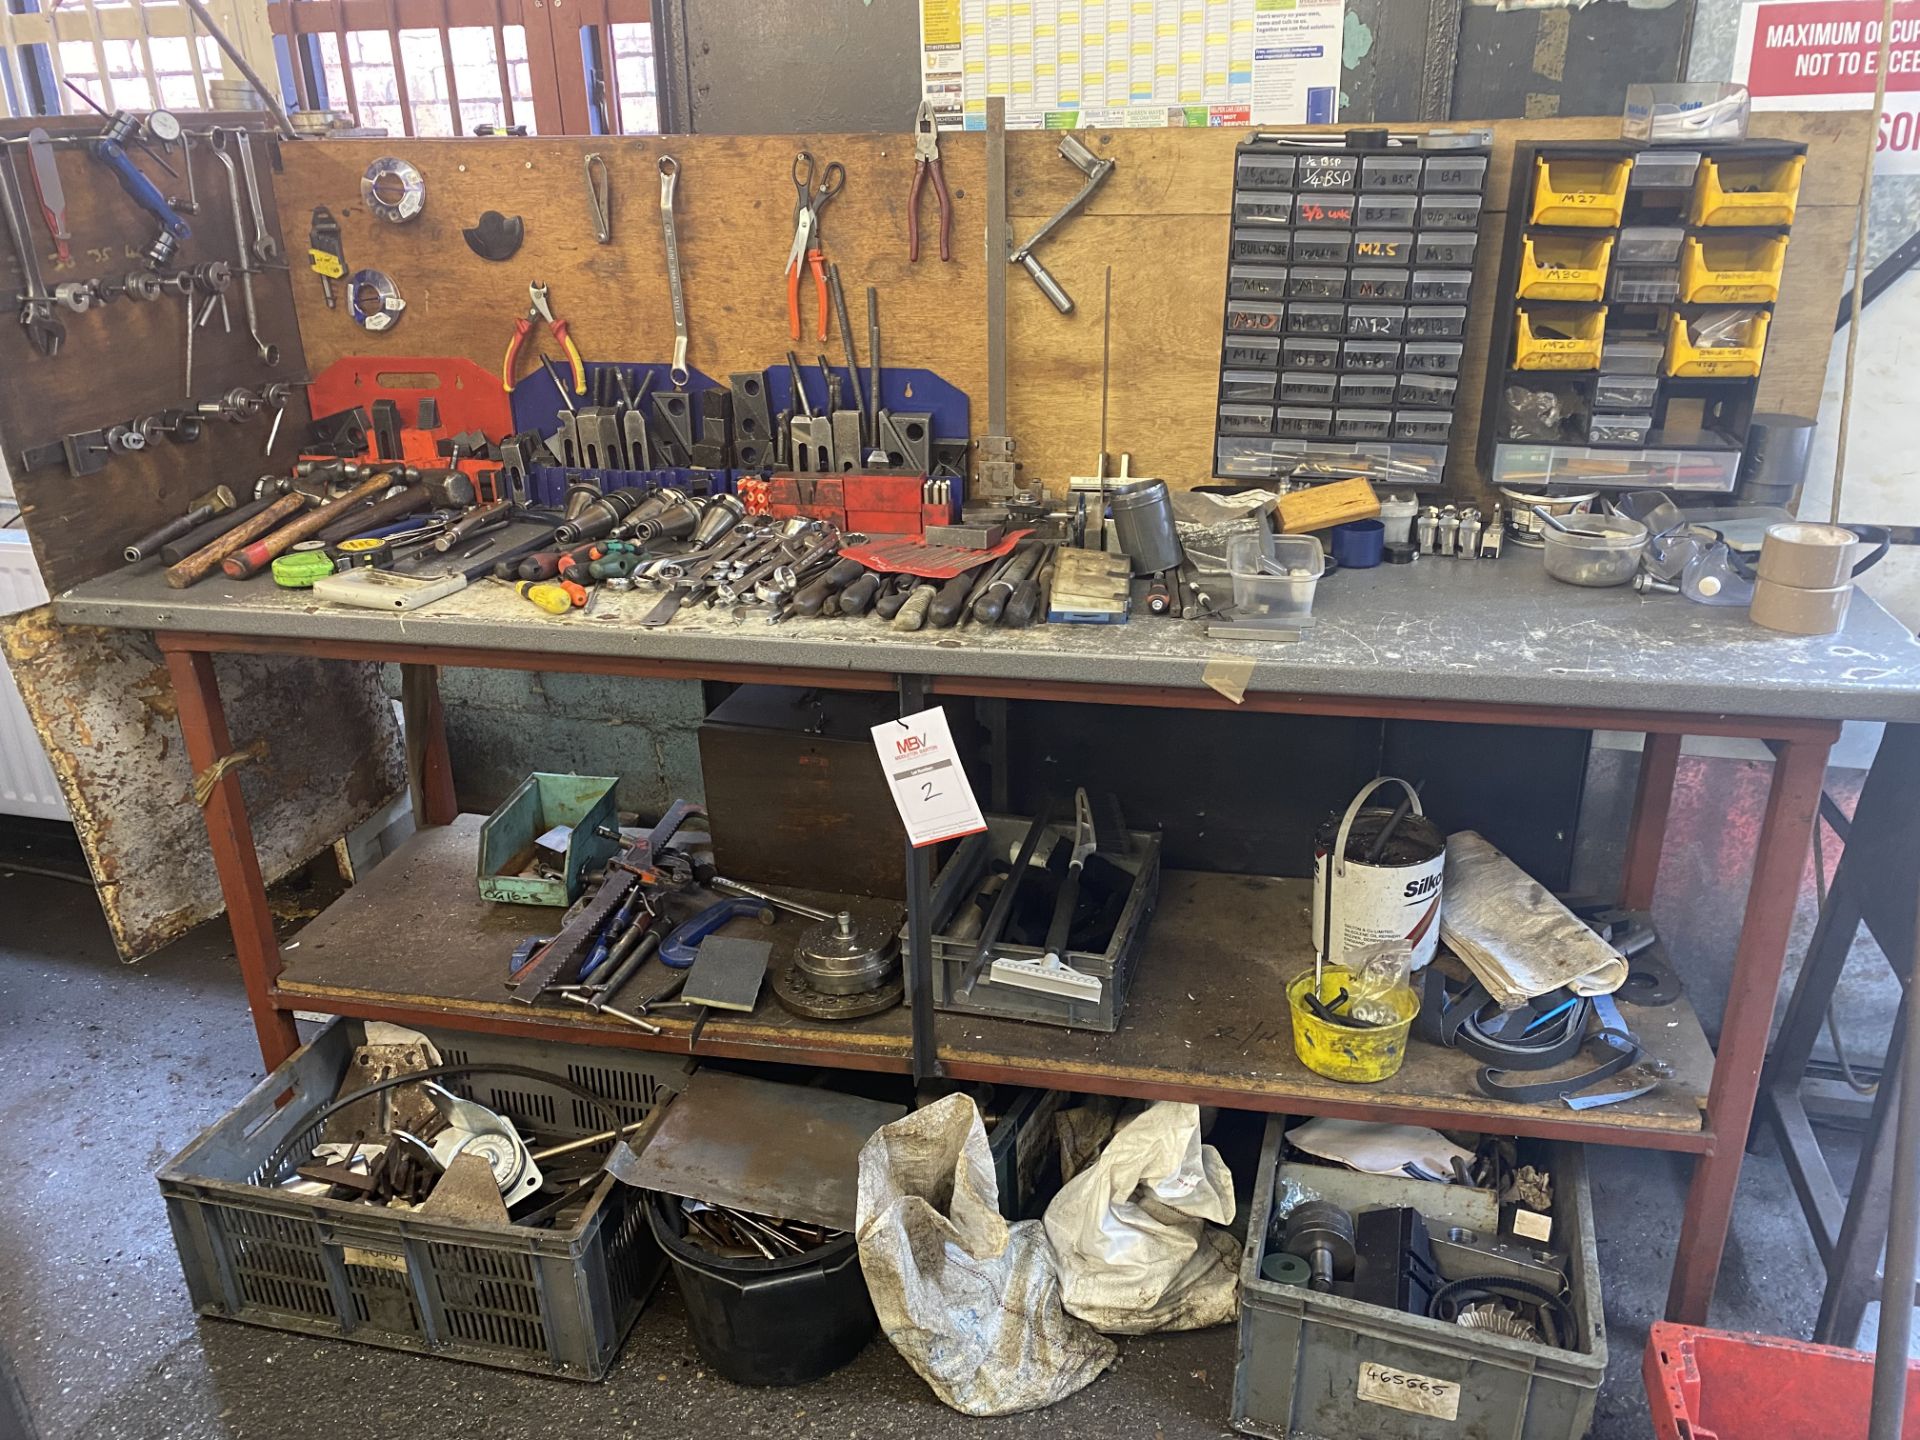 Tool Bench and Miscellaneous Contents